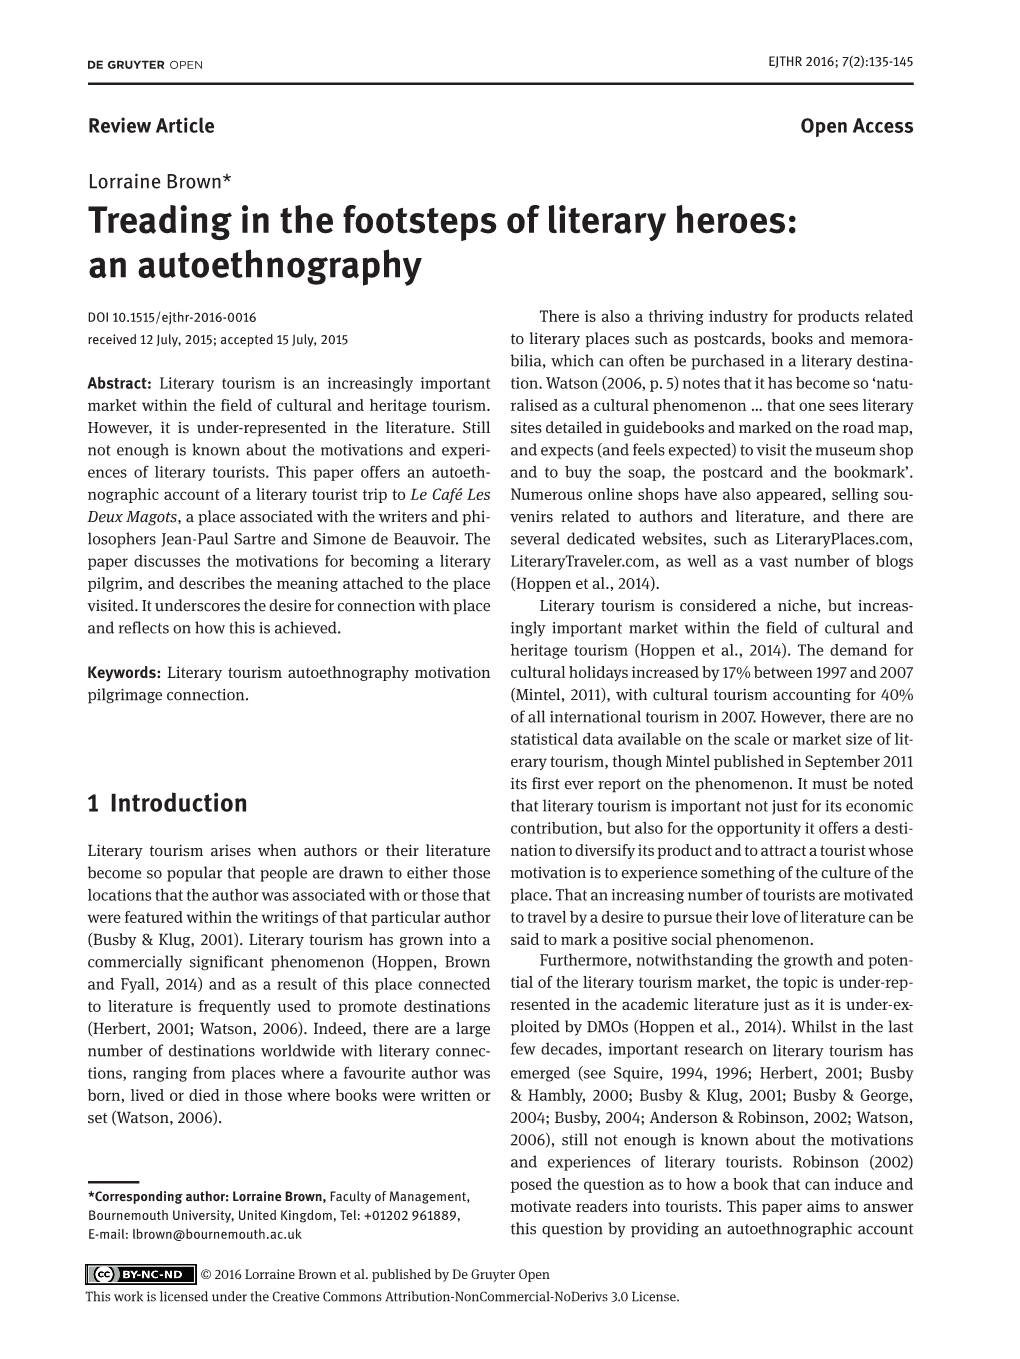 Treading in the Footsteps of Literary Heroes an Autoethnography Ed.Indd